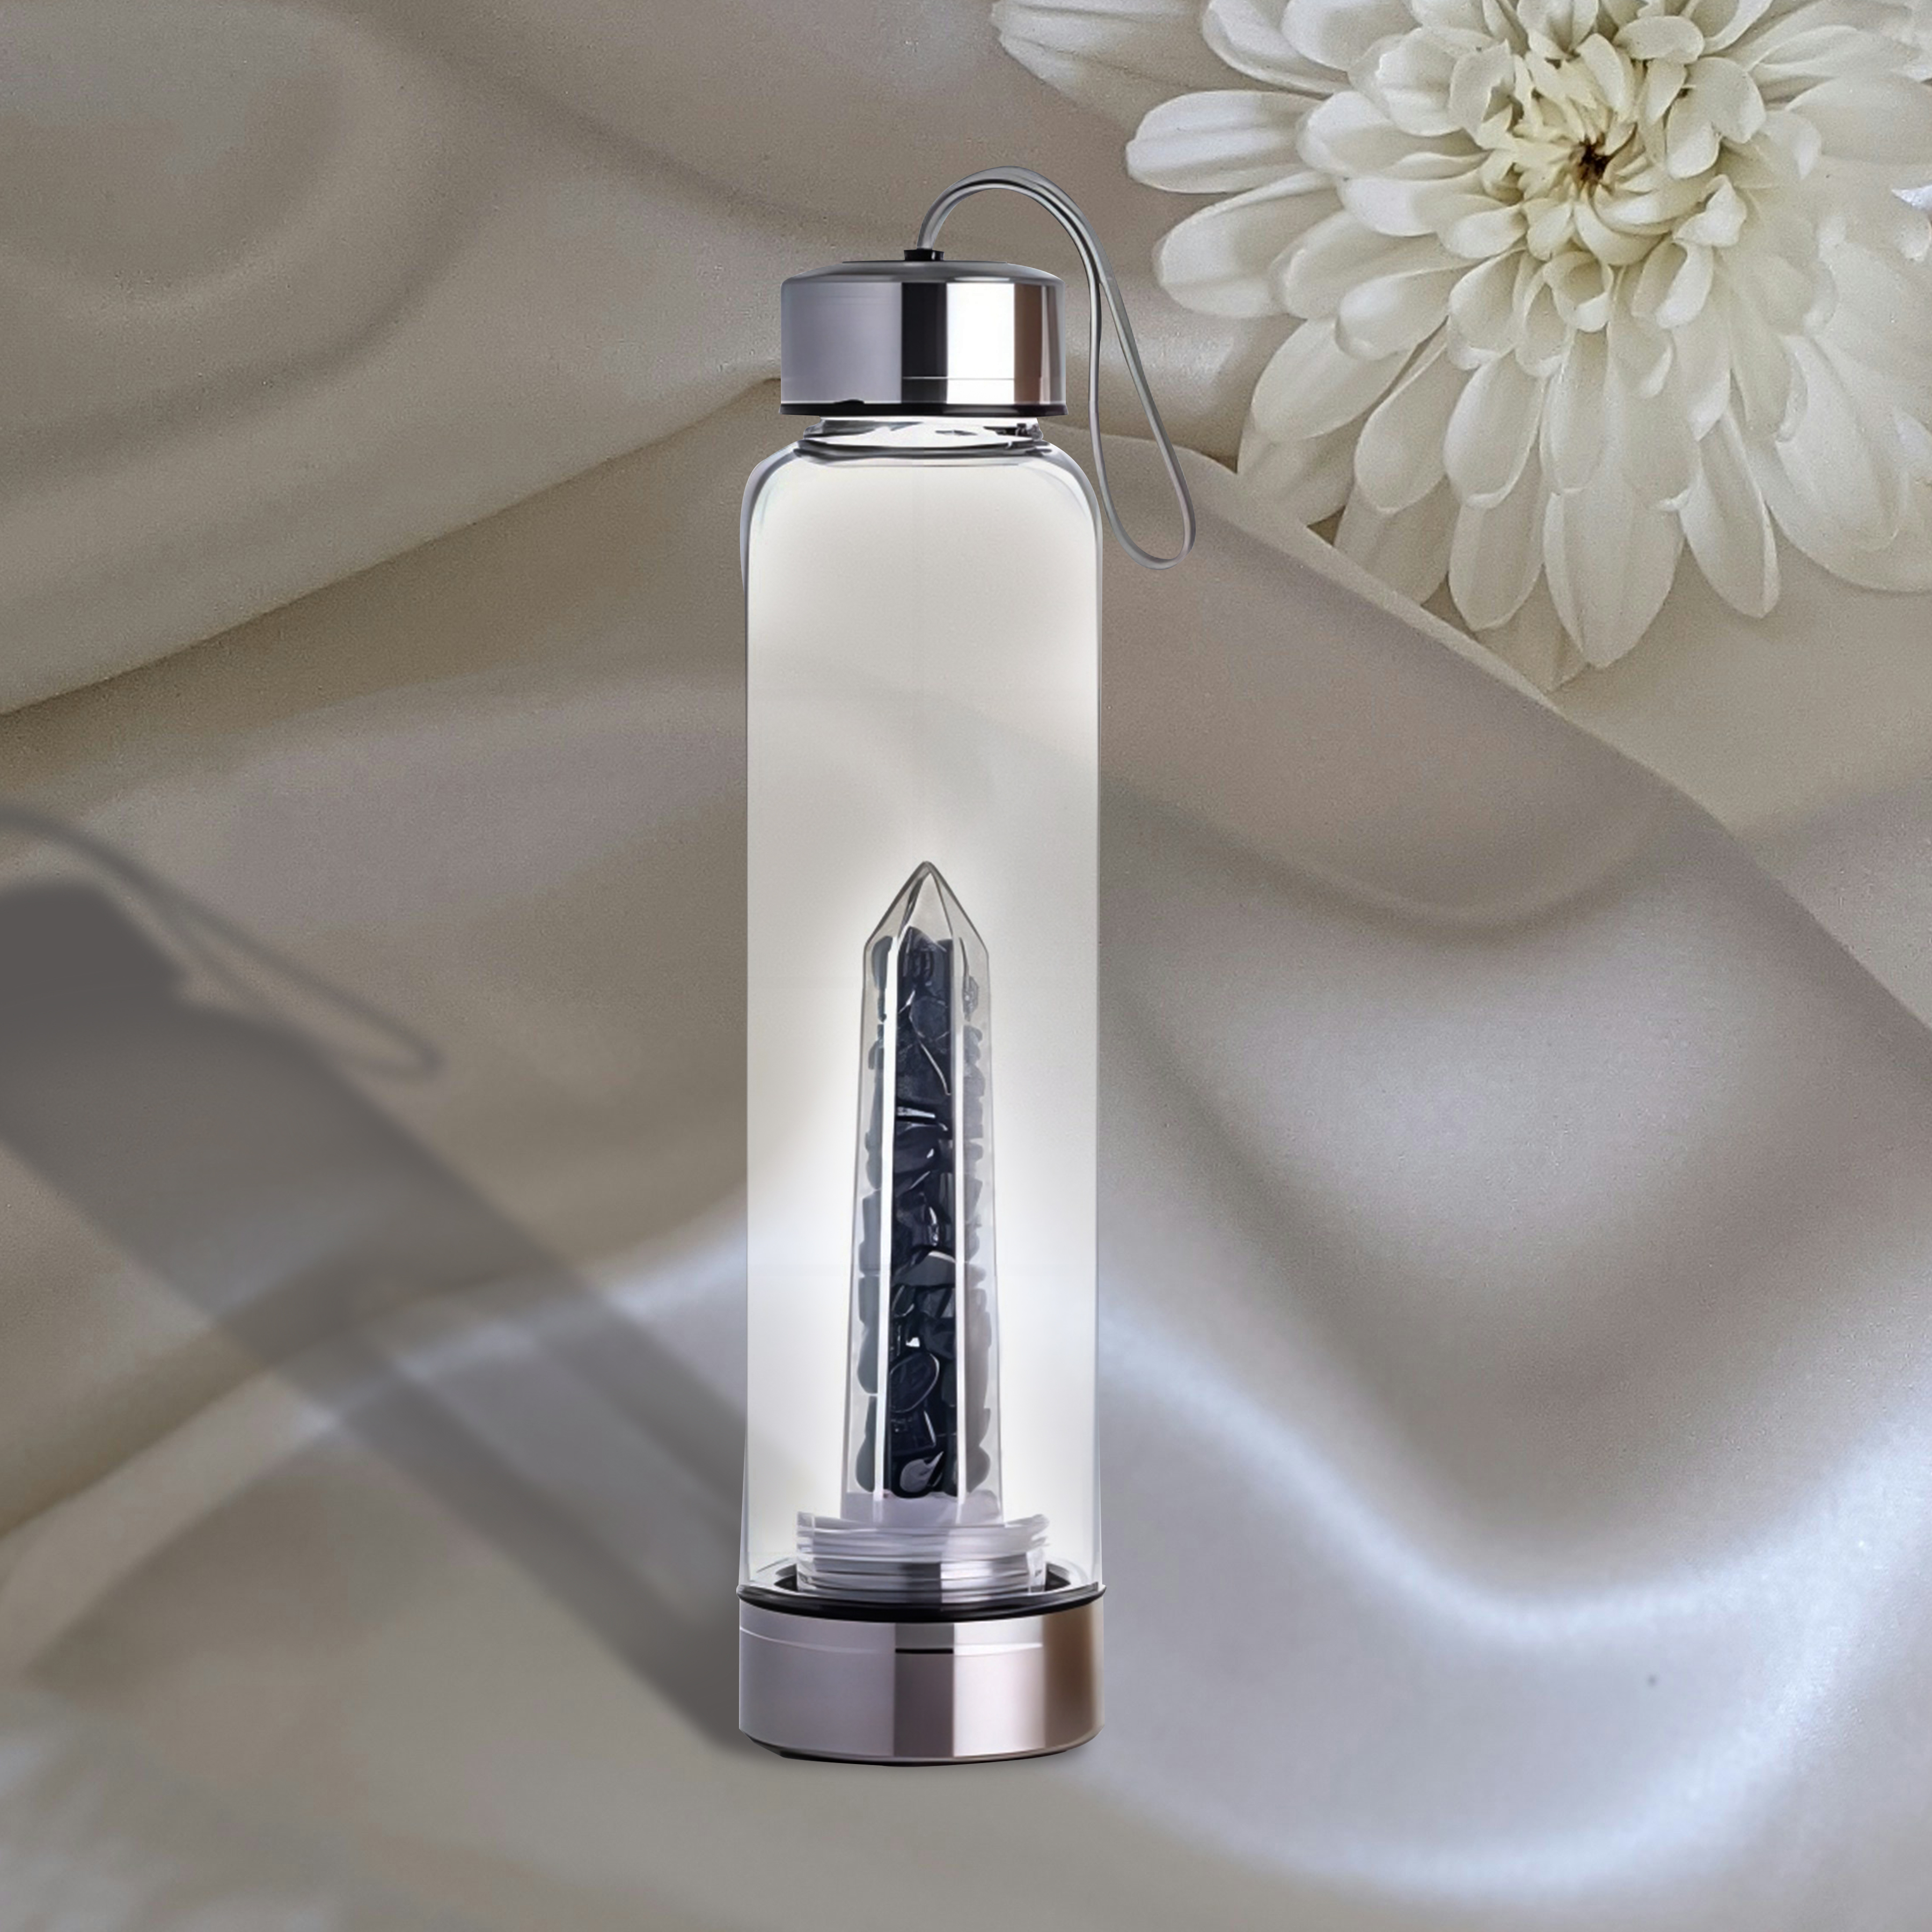 Lucklumen Crystal Elixir Feng Shui Luck & Protection Water Bottle Attracts Wealth and Success 